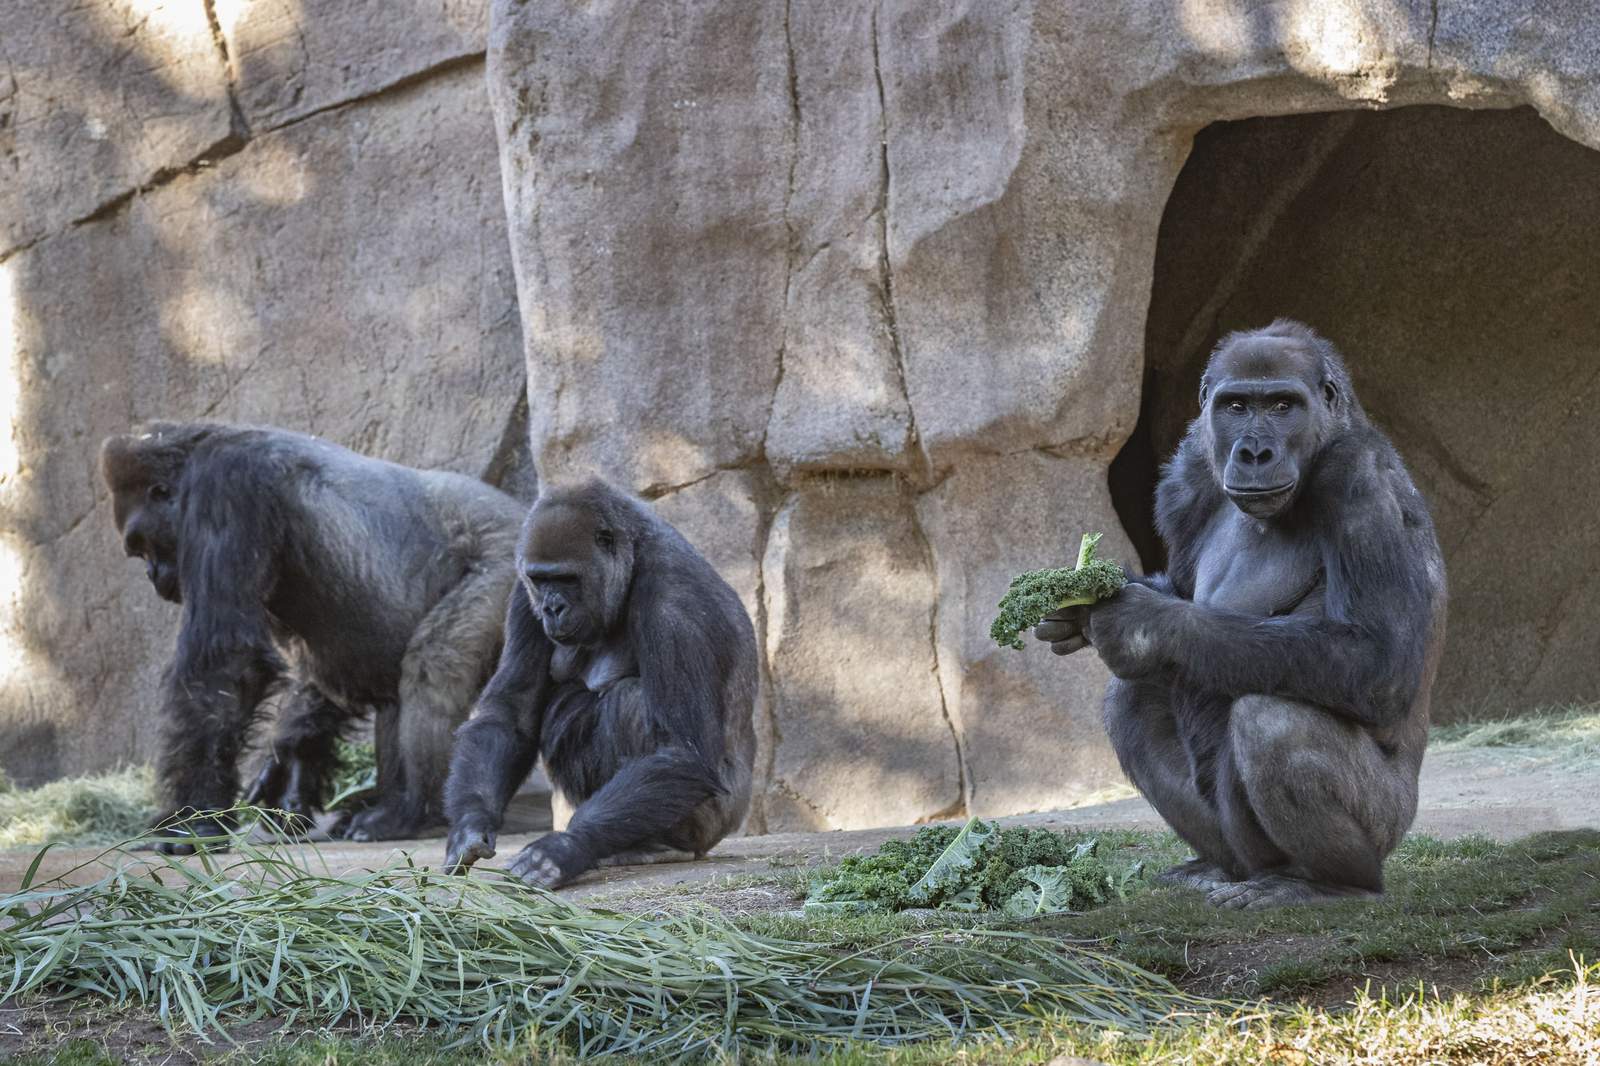 Gorillas doing well, recovering from COVID-19, zoo says